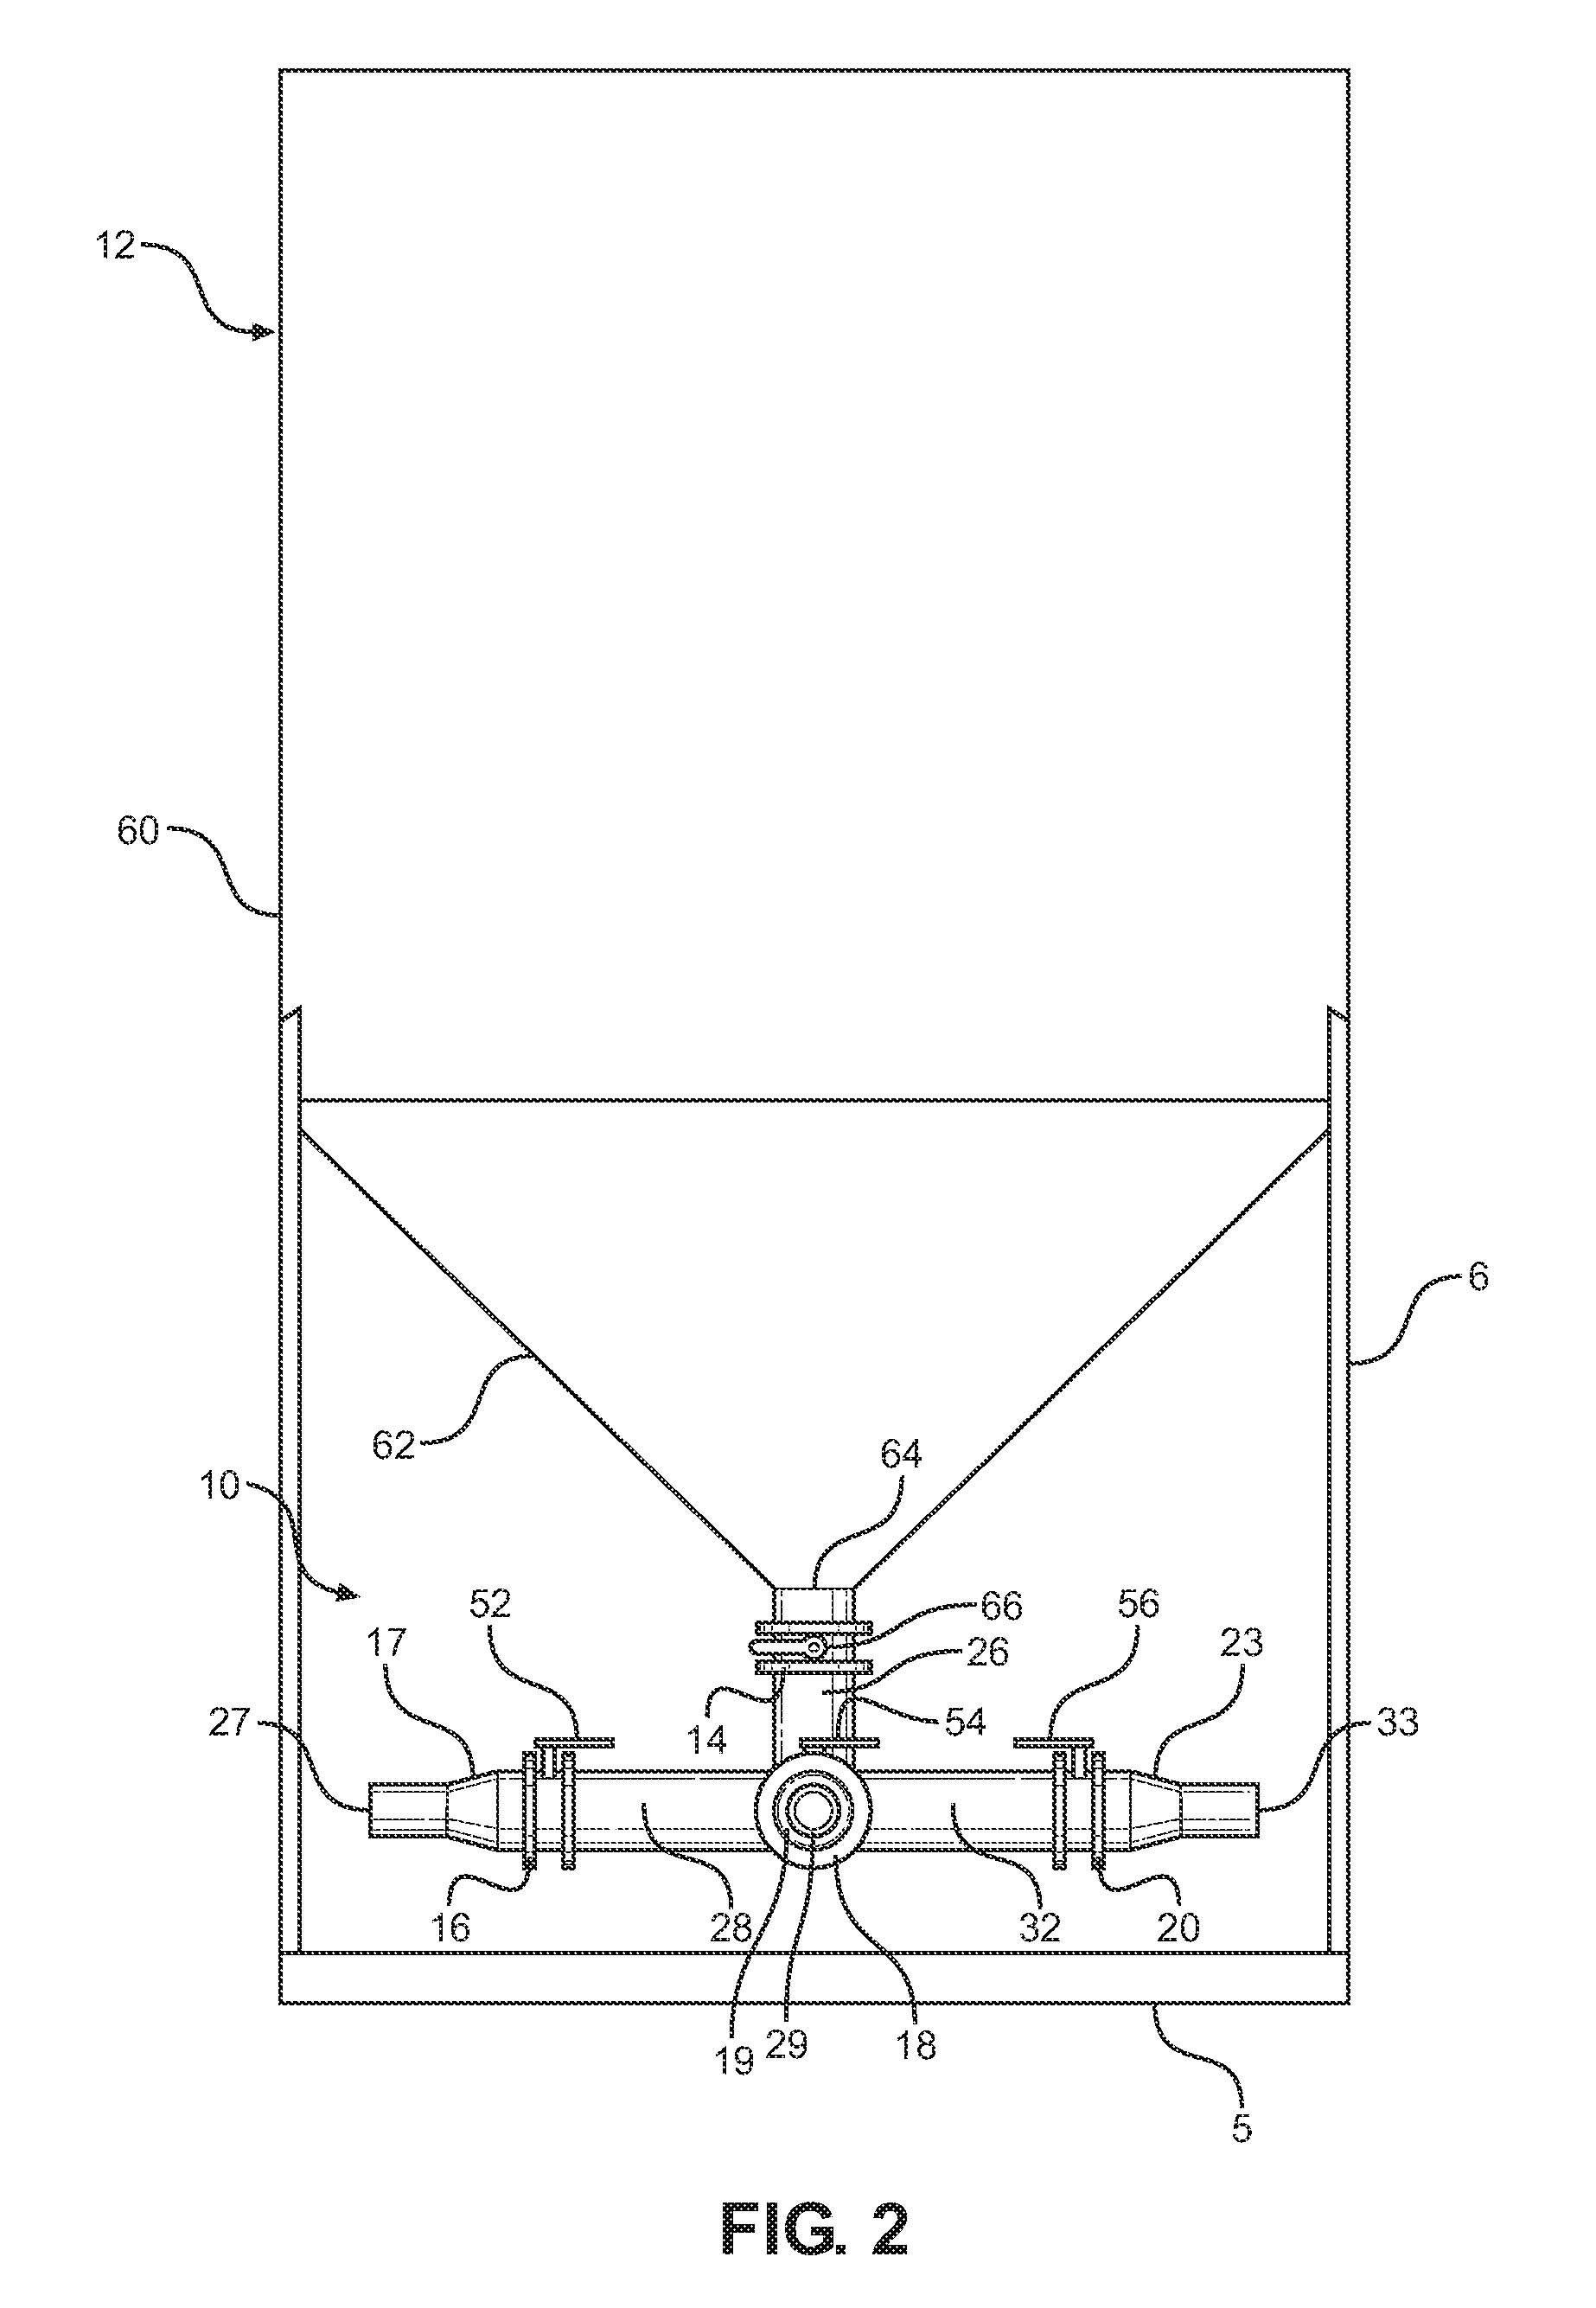 Device and Method for Multi-Path Flow From Vertical Hydraulic Tank